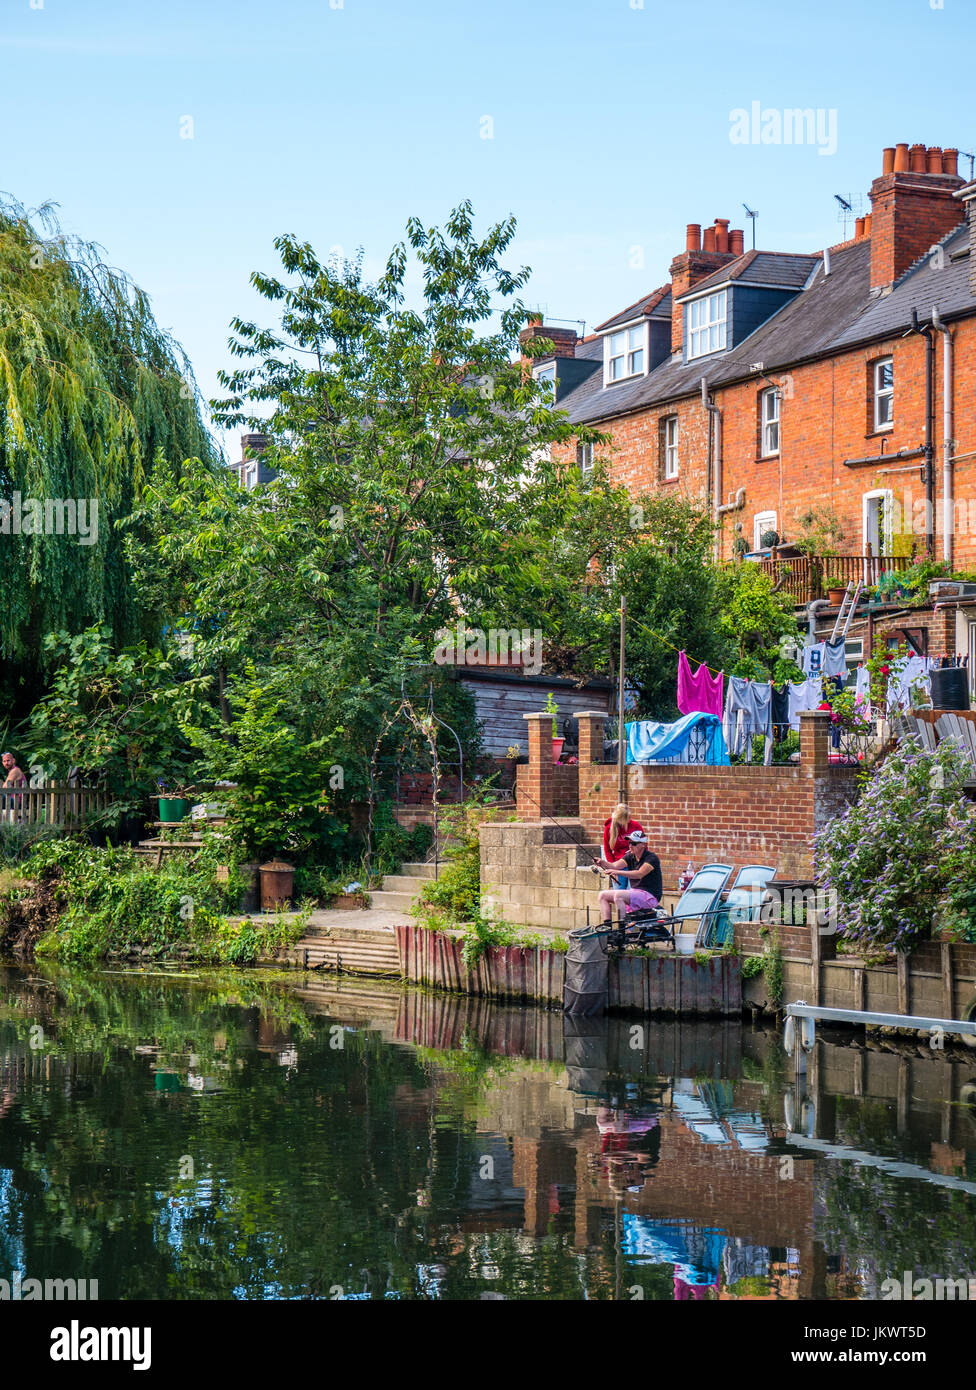 Terrace Housing and Gardens, River Kennet, Reading, Berkshire, England Stock Photo